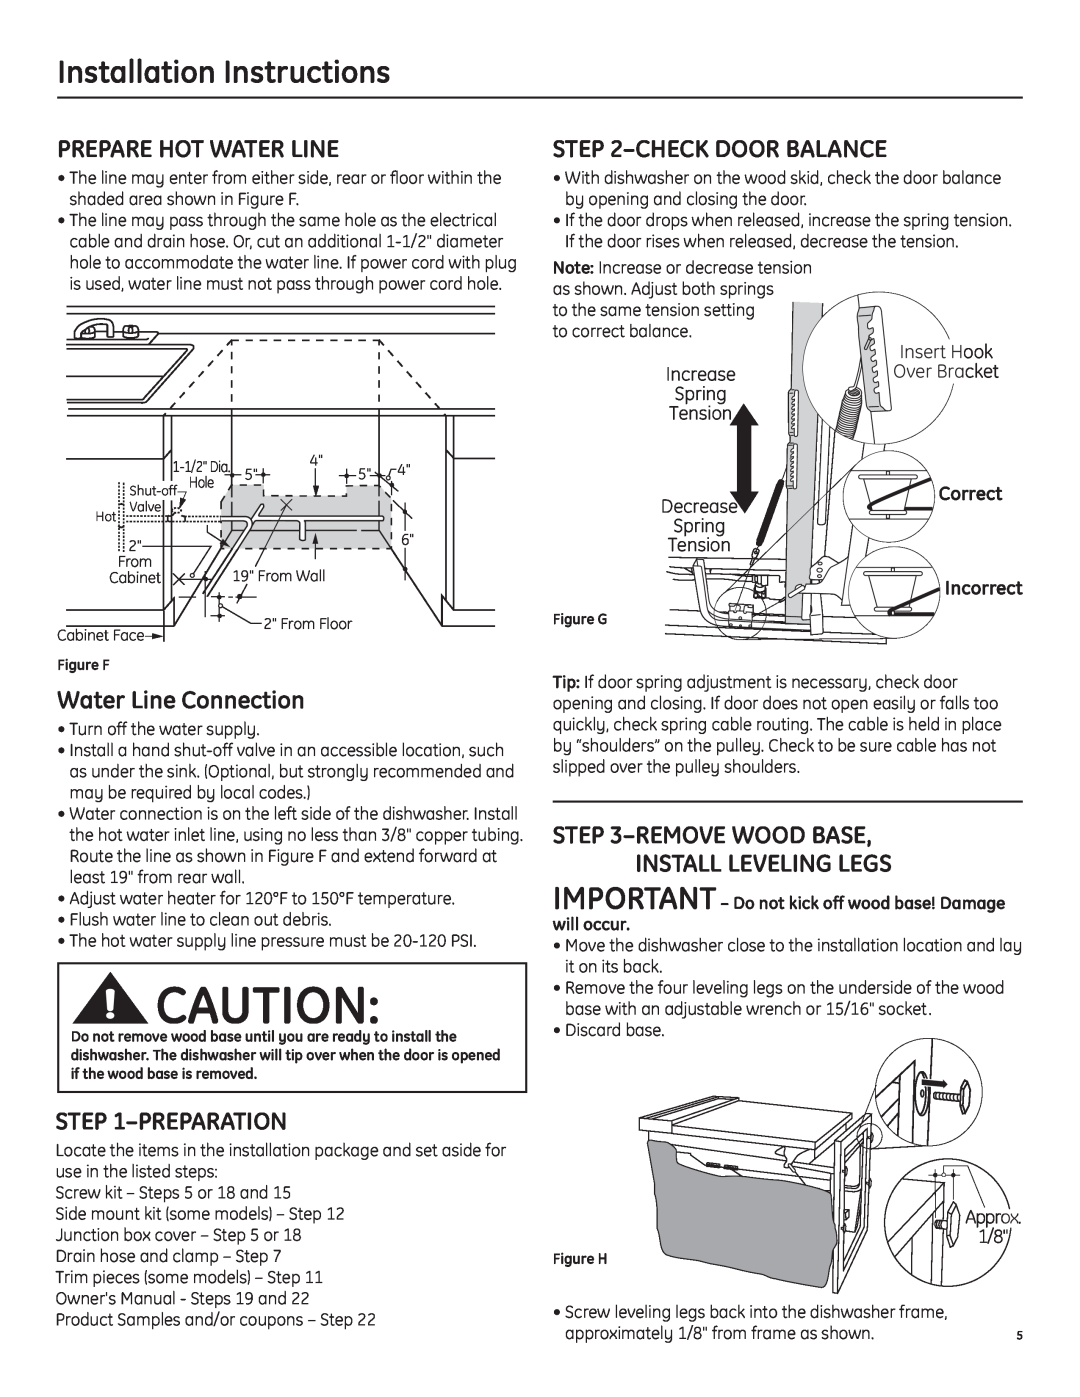 GE GSD6000 manual Installation Instructions, Prepare Hot Water Line, Check Door Balance, Water Line Connection, Preparation 